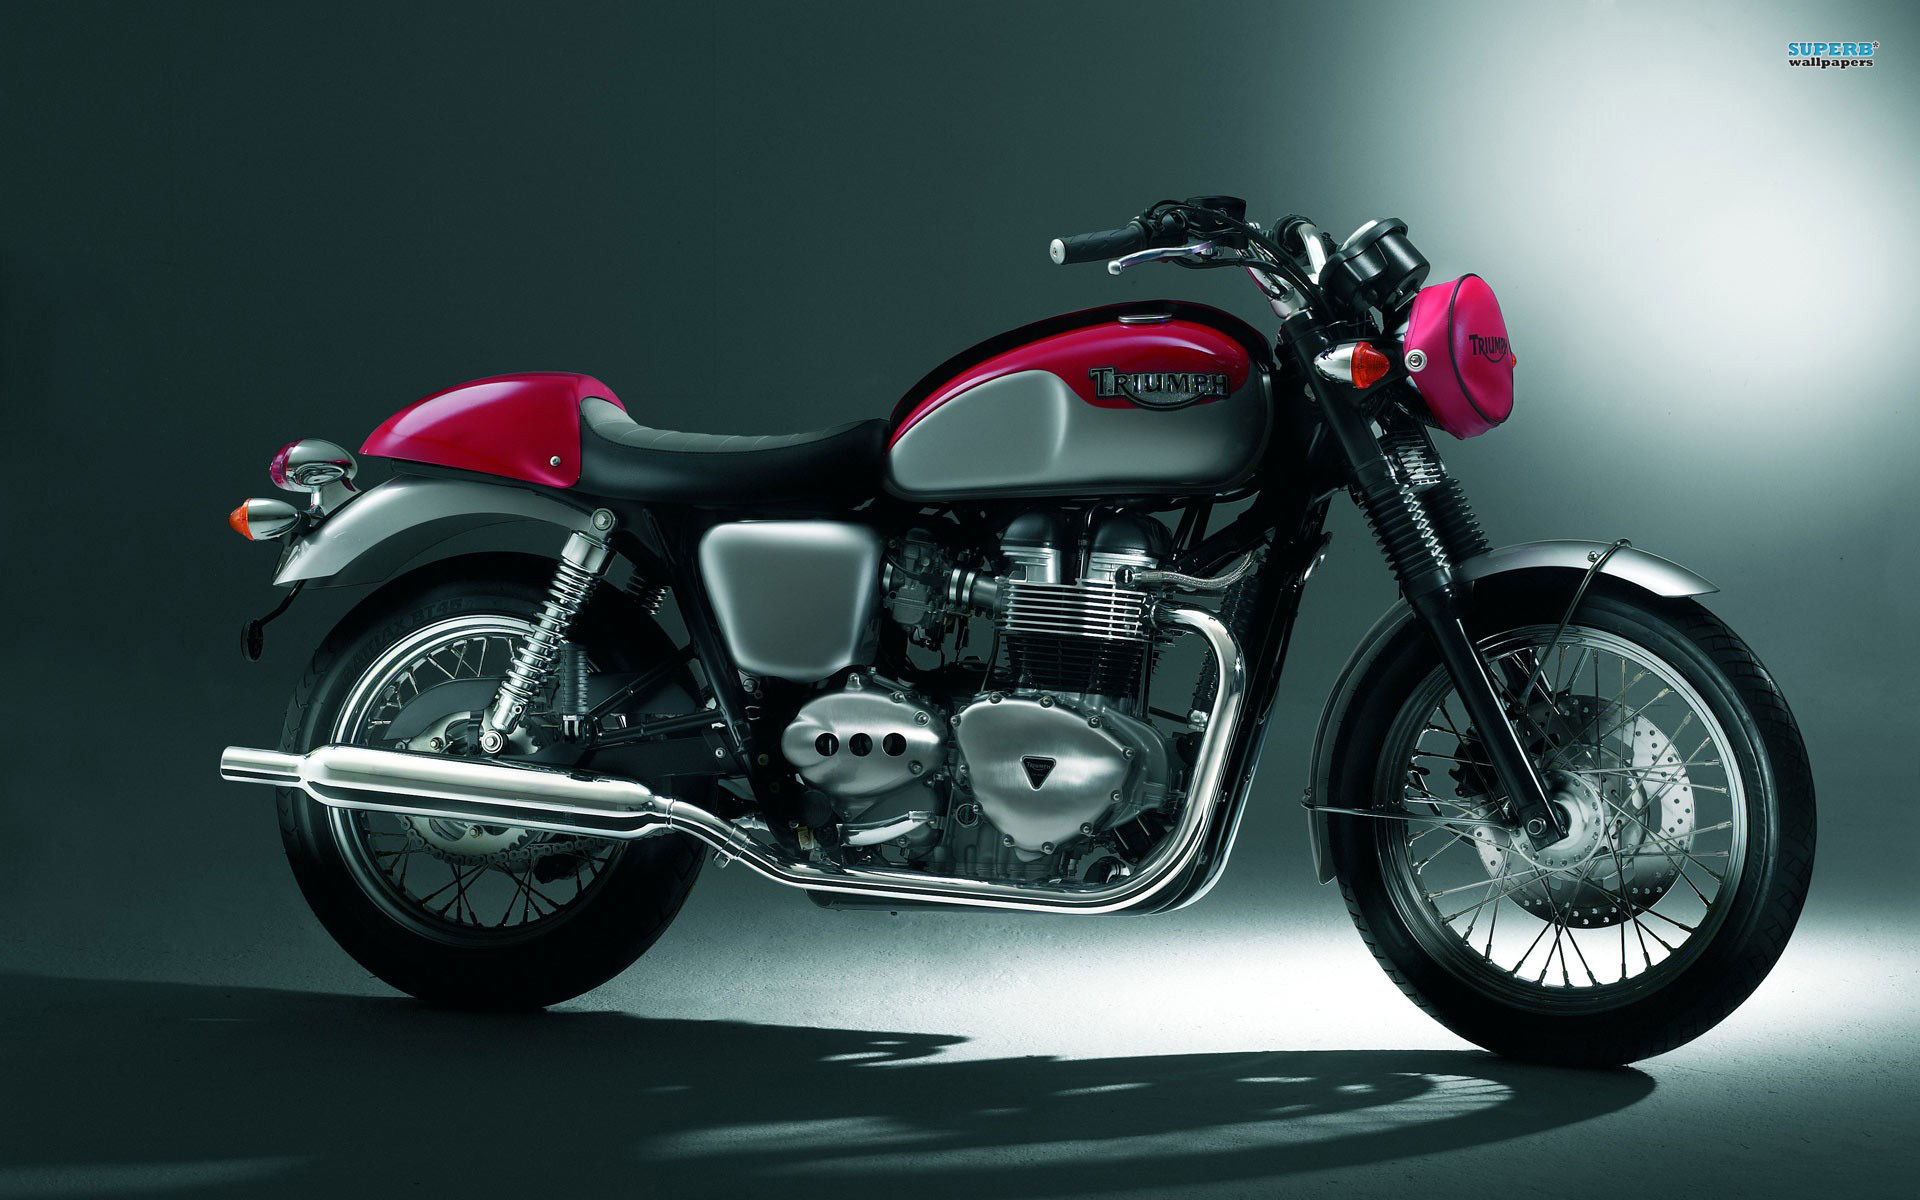 Triumph Bonneville Motorcycle With Resolutions Pixel